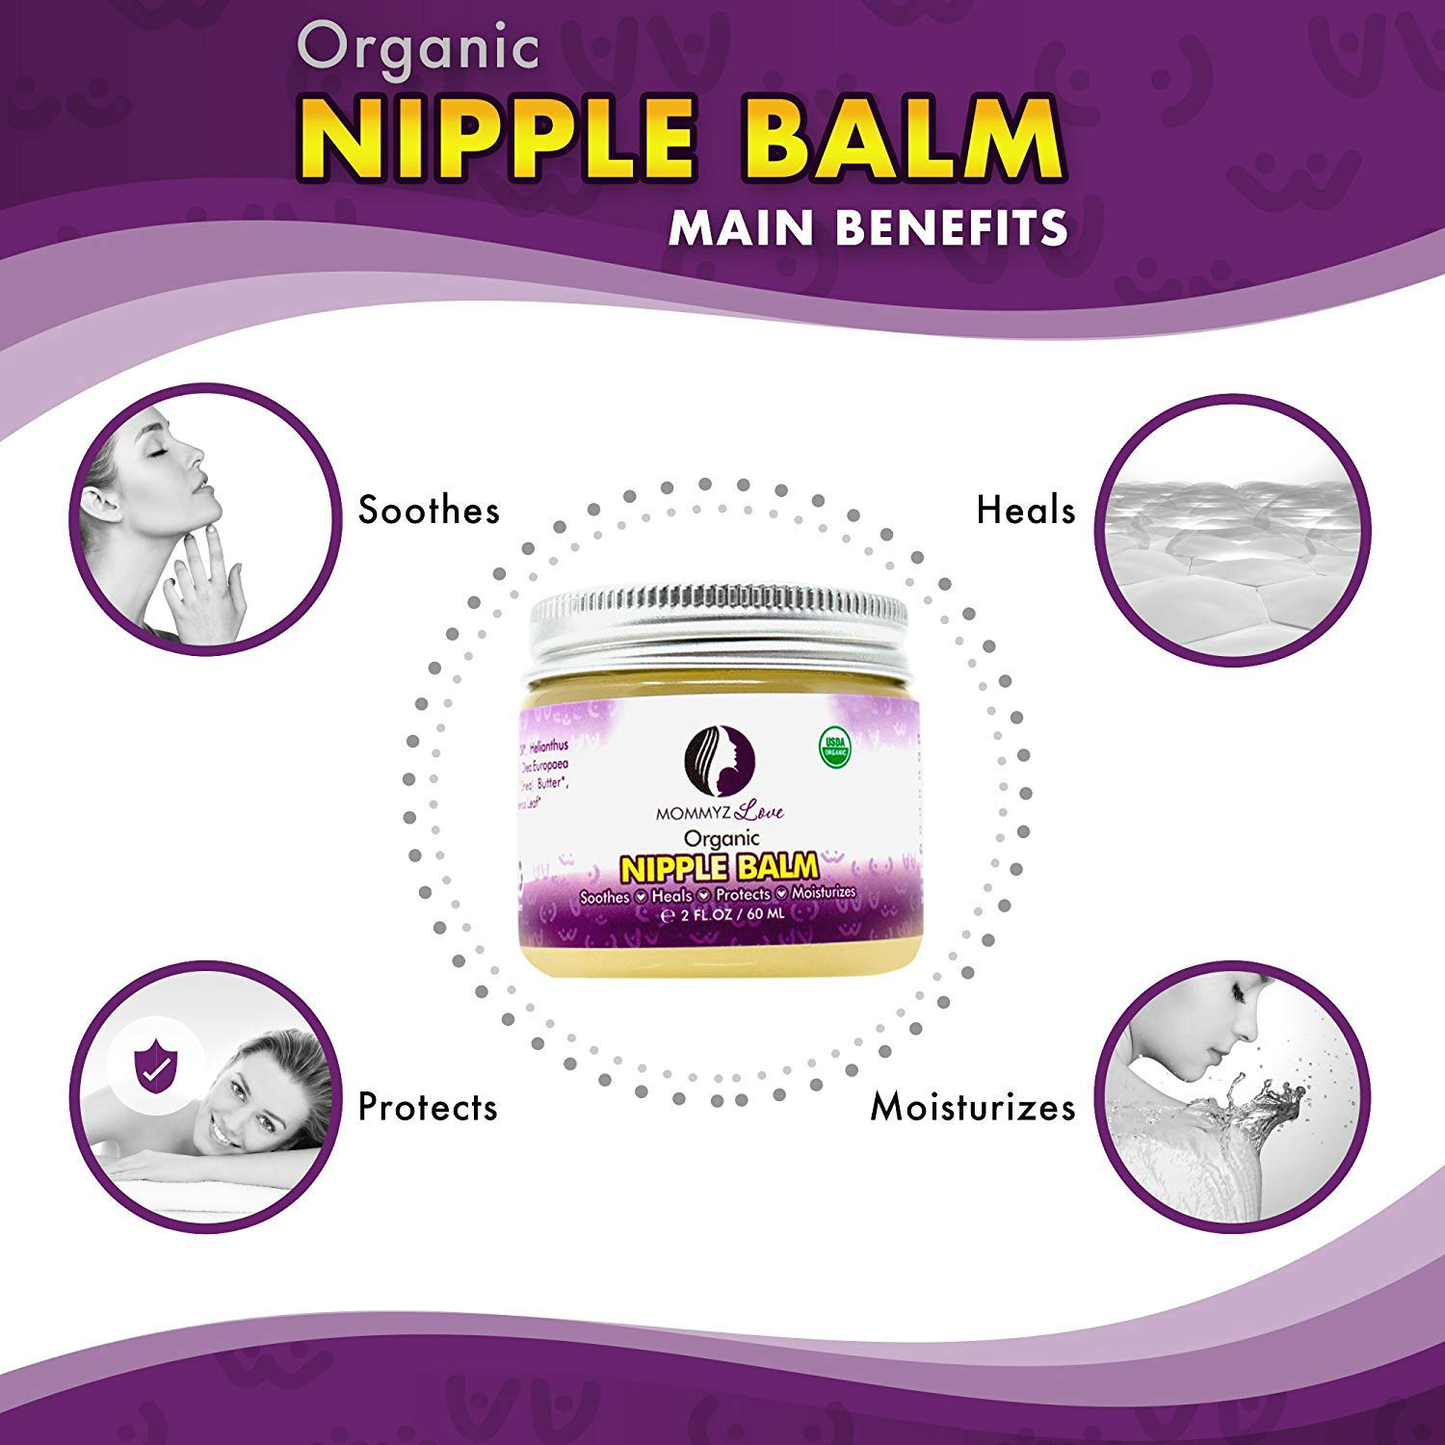 Best Nipple Cream for Breastfeeding Relief (2 oz) - Provides Immediate Relief To Sore, Dry And Cracked Nipples Even After A Single Use - PEDIATRICIAN TESTED - USDA Certified Organic (1 Jar)